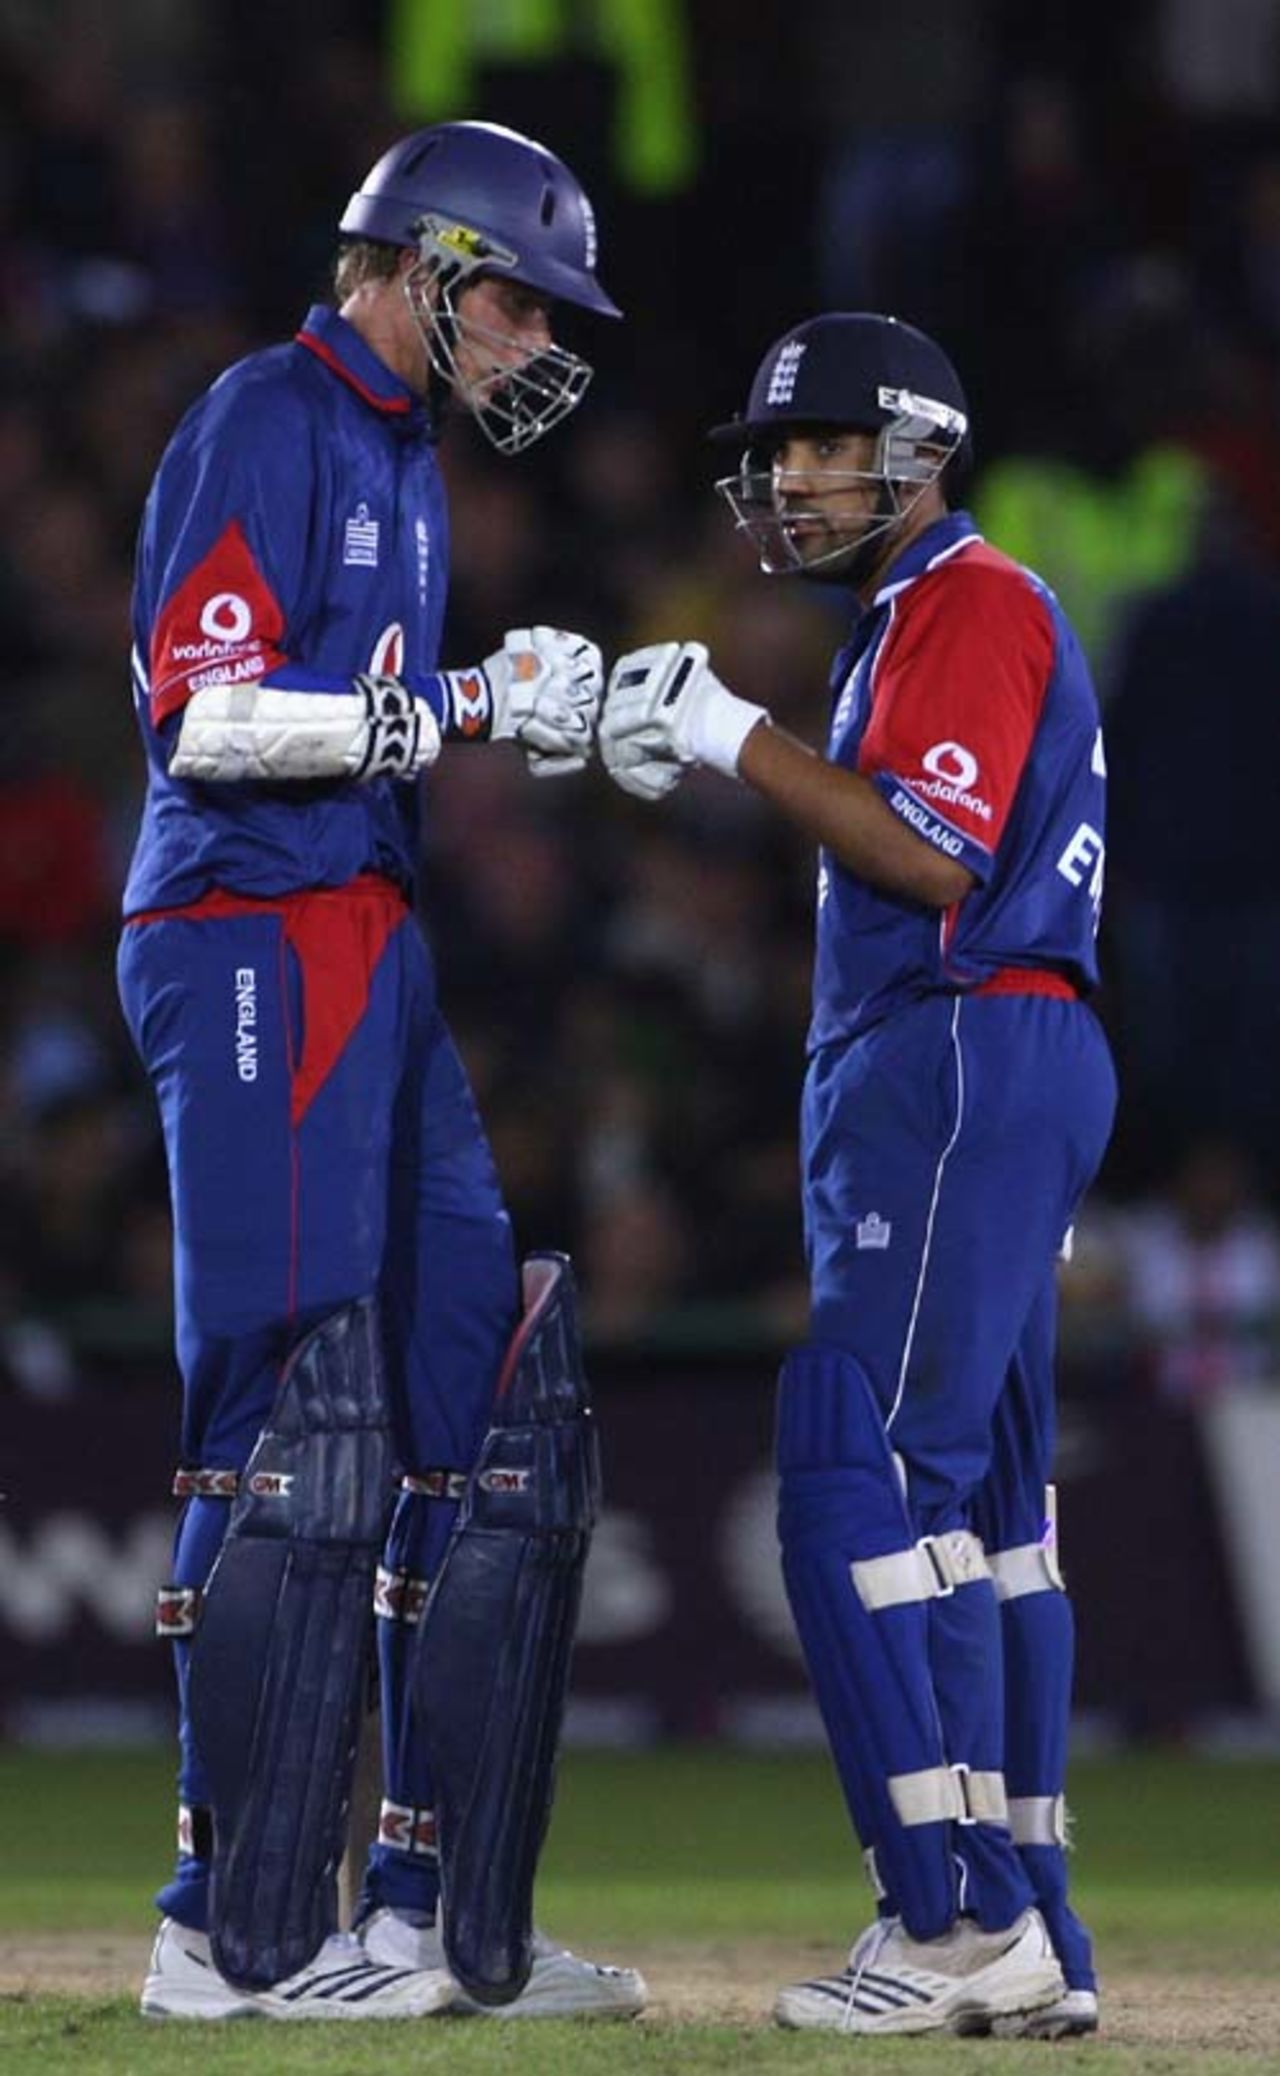 Stuart Broad and Ravi Bopara in a mid-wicket conference, England v India, 4th ODI, Old Trafford, August 30, 2007